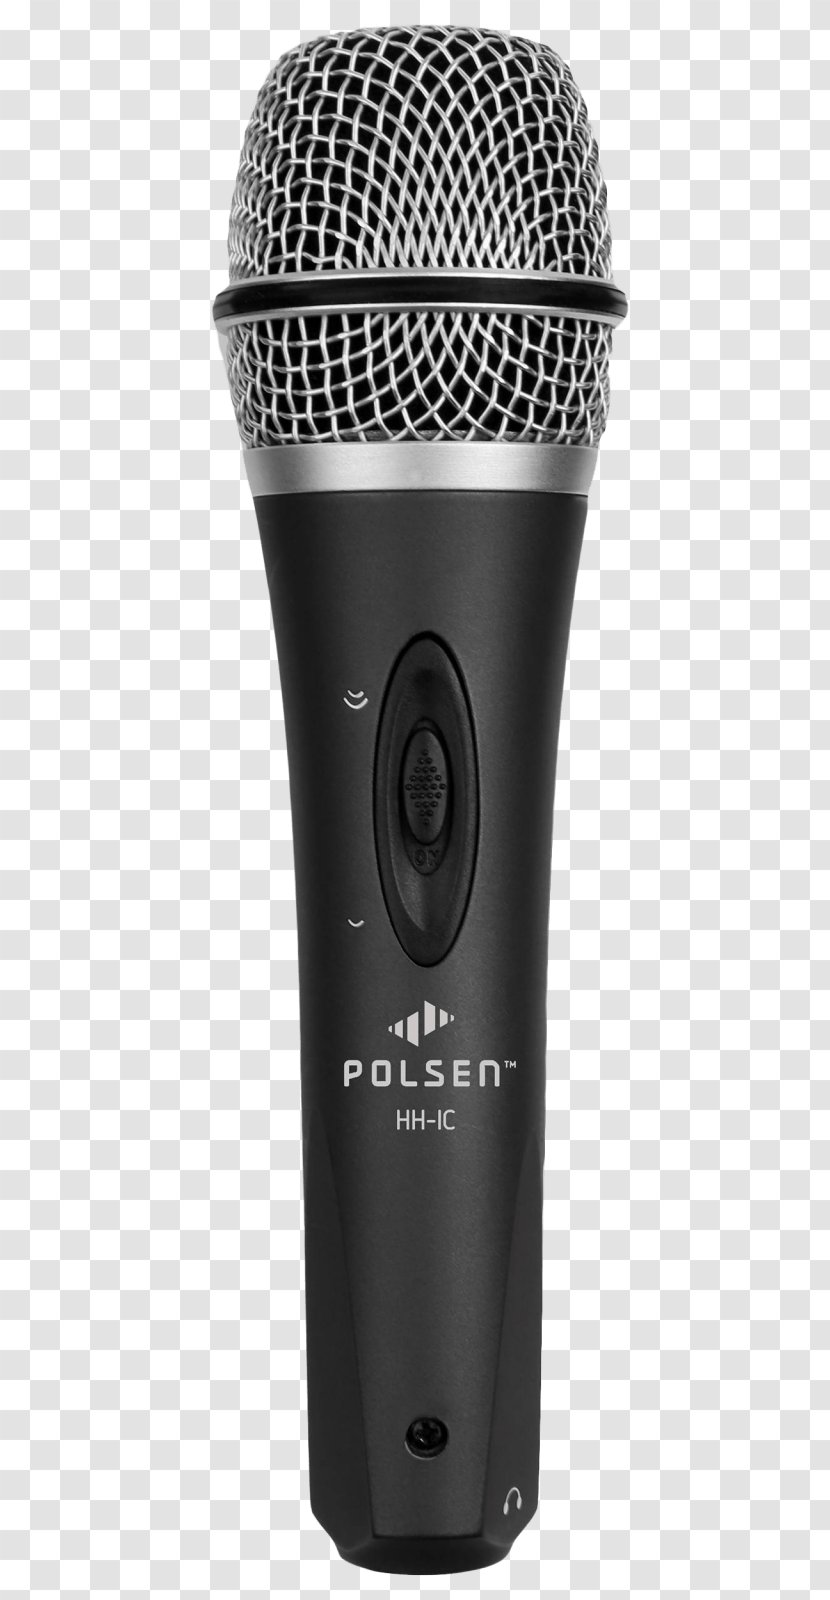 Microphone Clip Art Image Transparency - Technology Transparent PNG